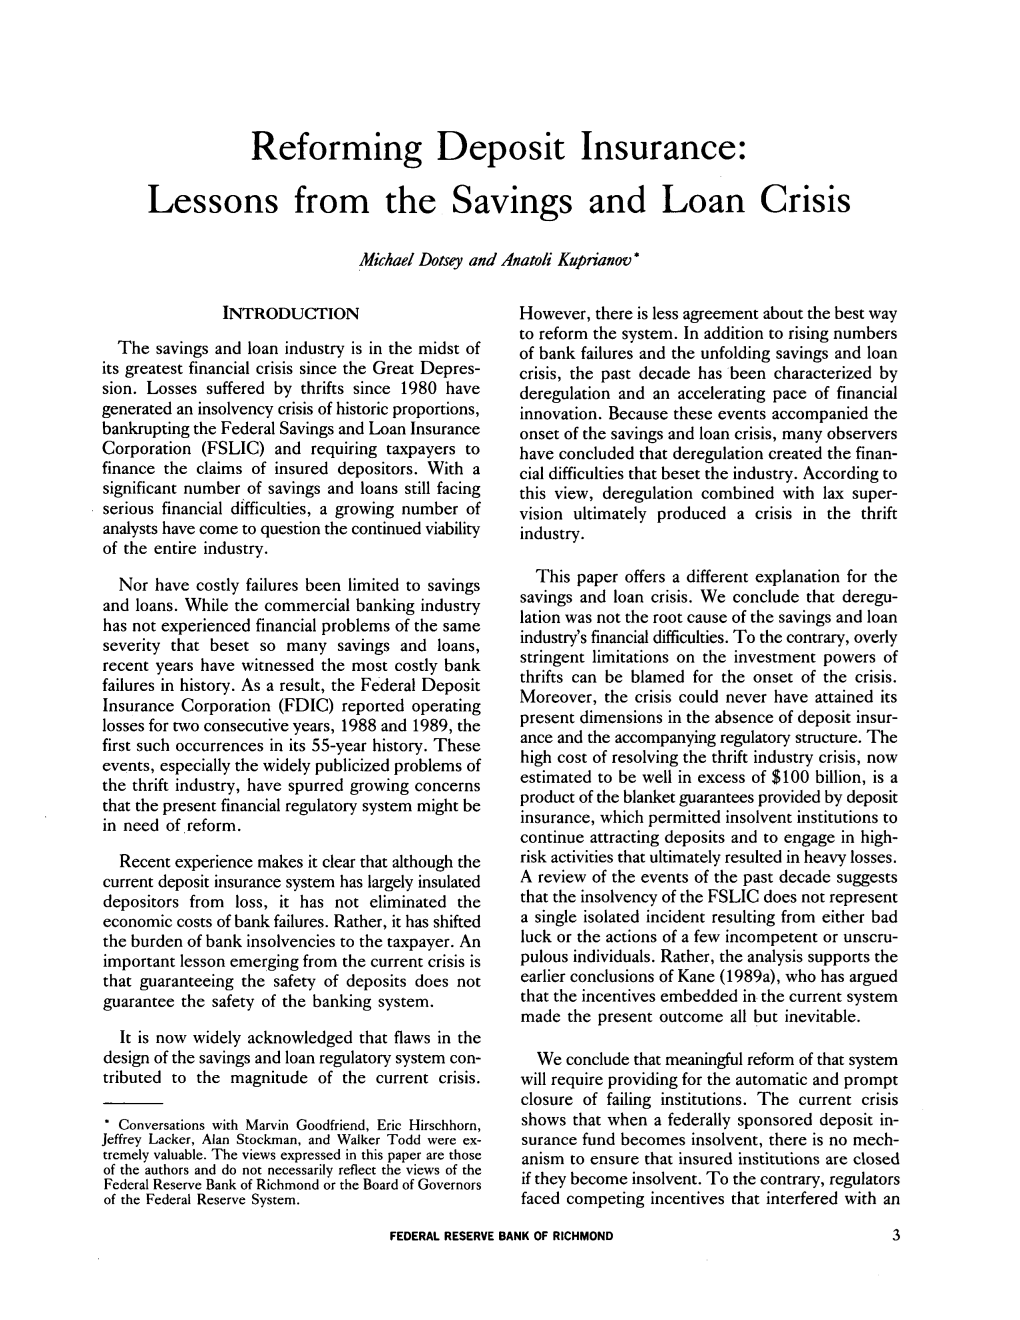 Reforming Deposit Insurance: Lessons from the Savings and Loan Crisis